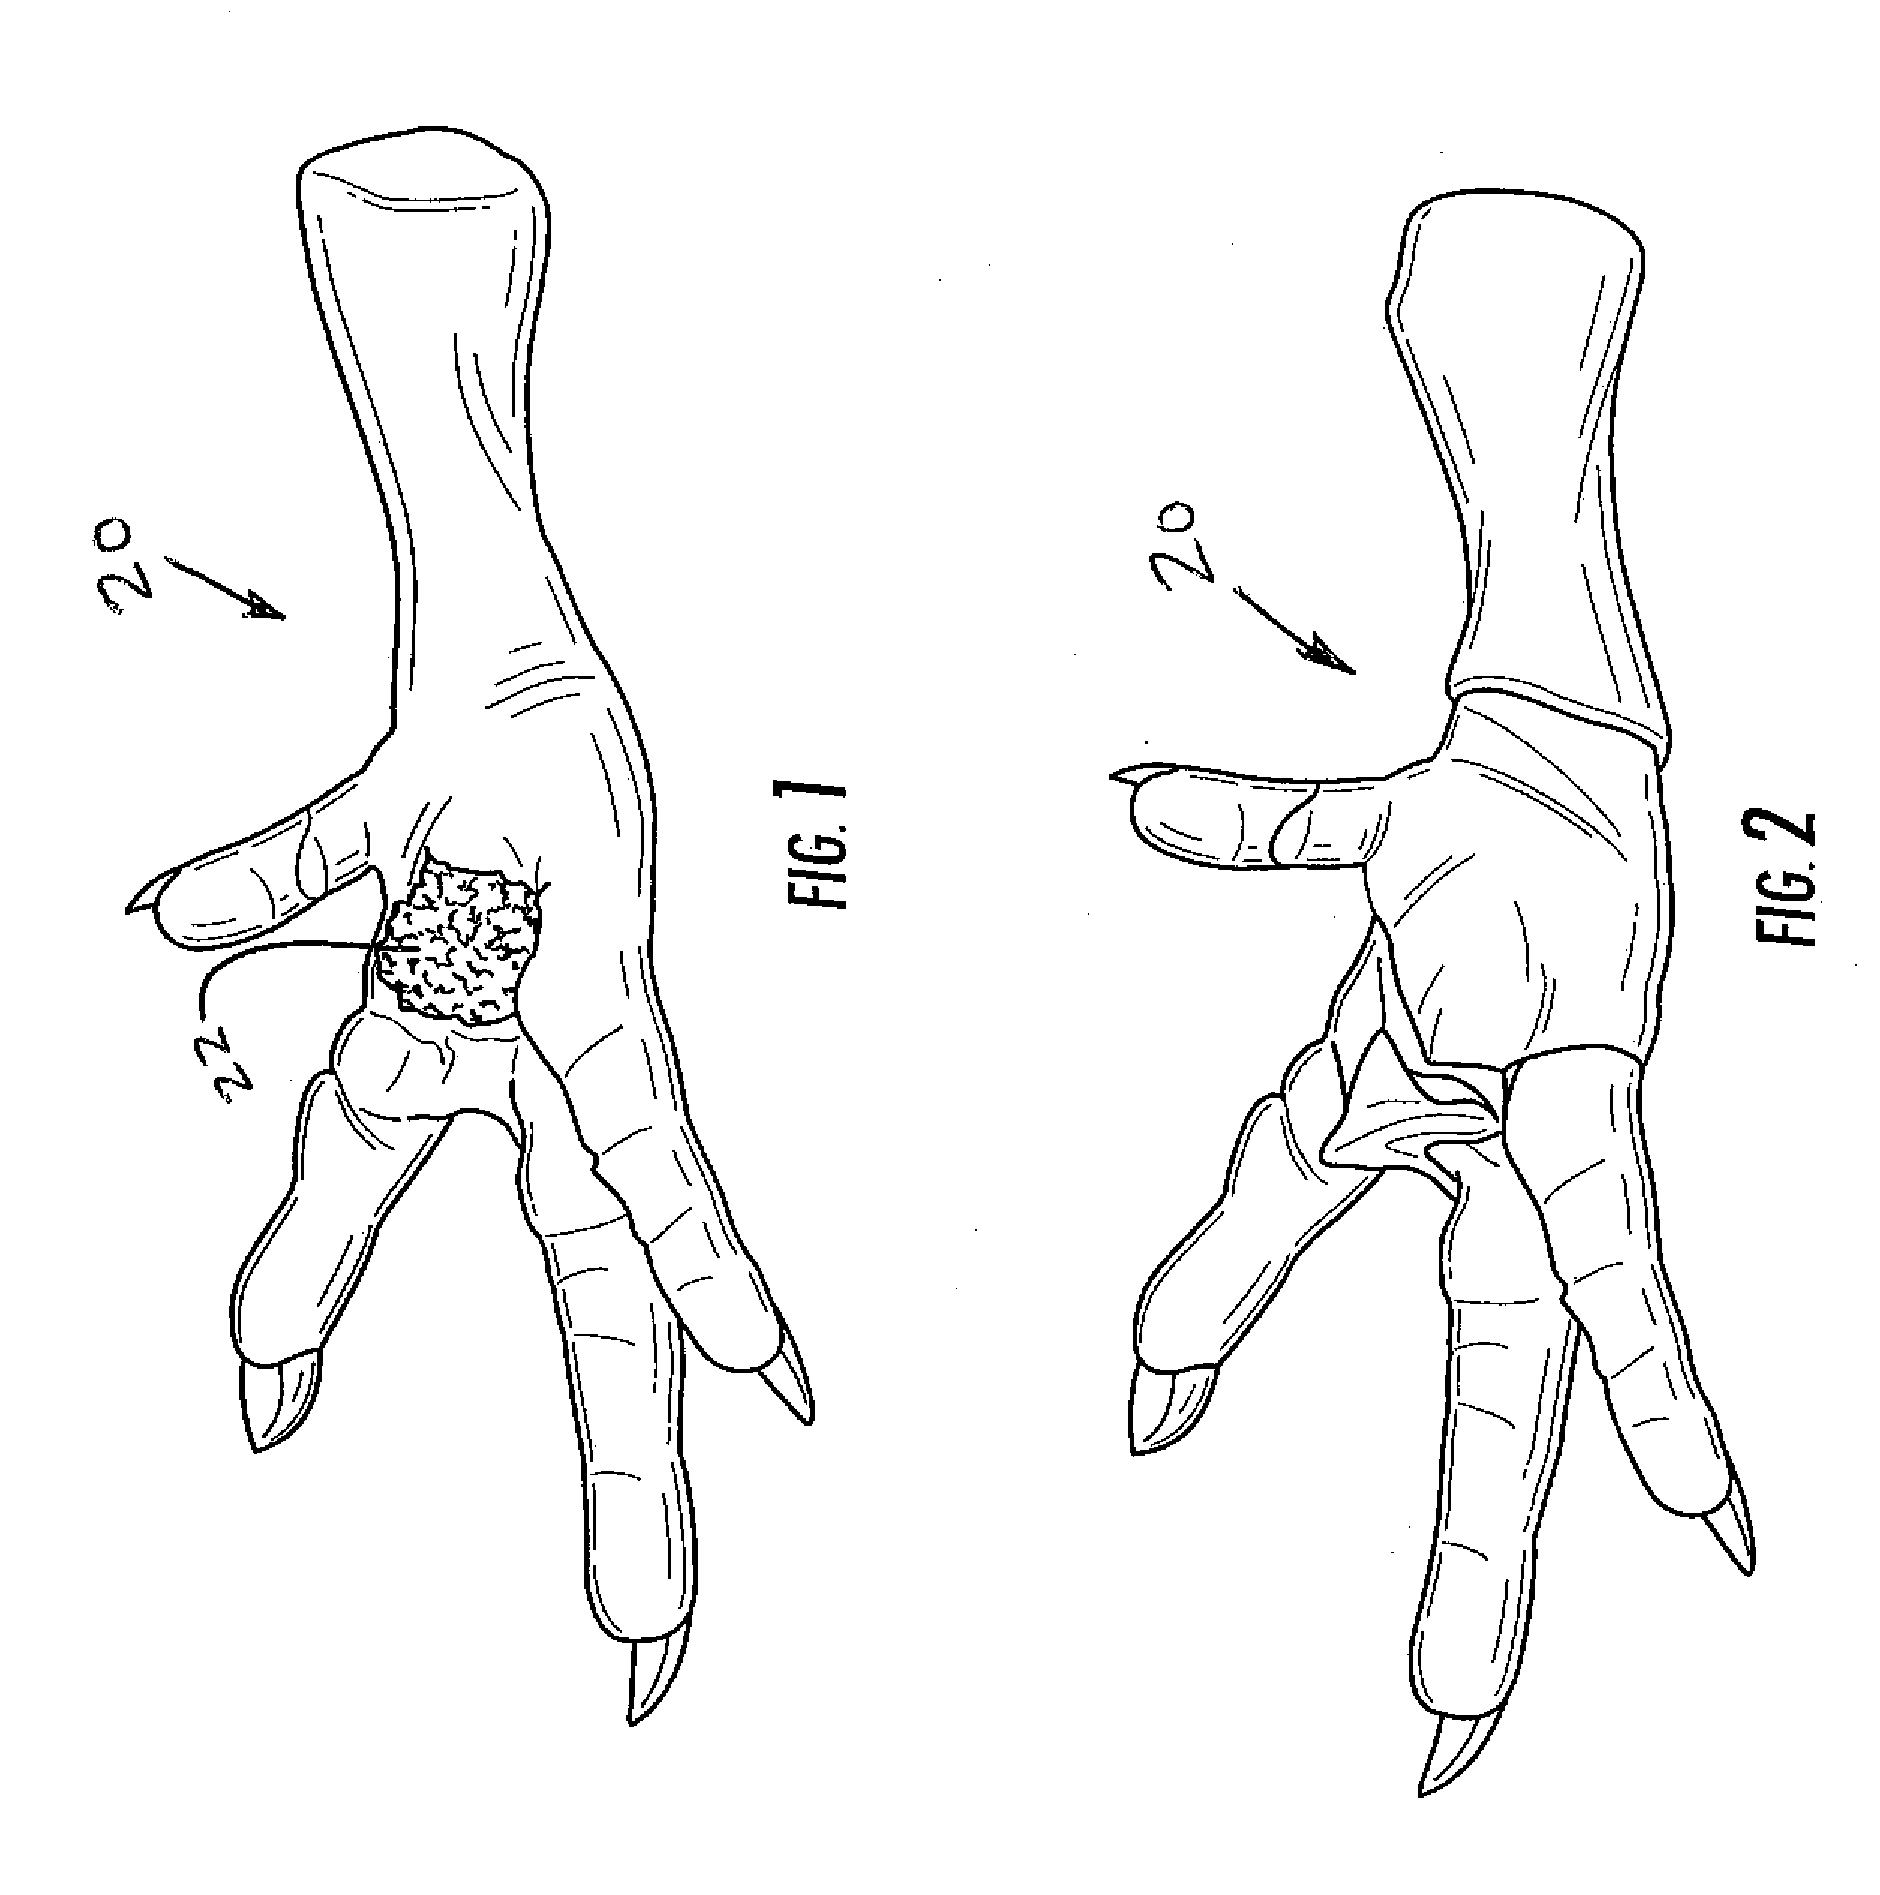 Device for Removing Material from Feet of Poultry